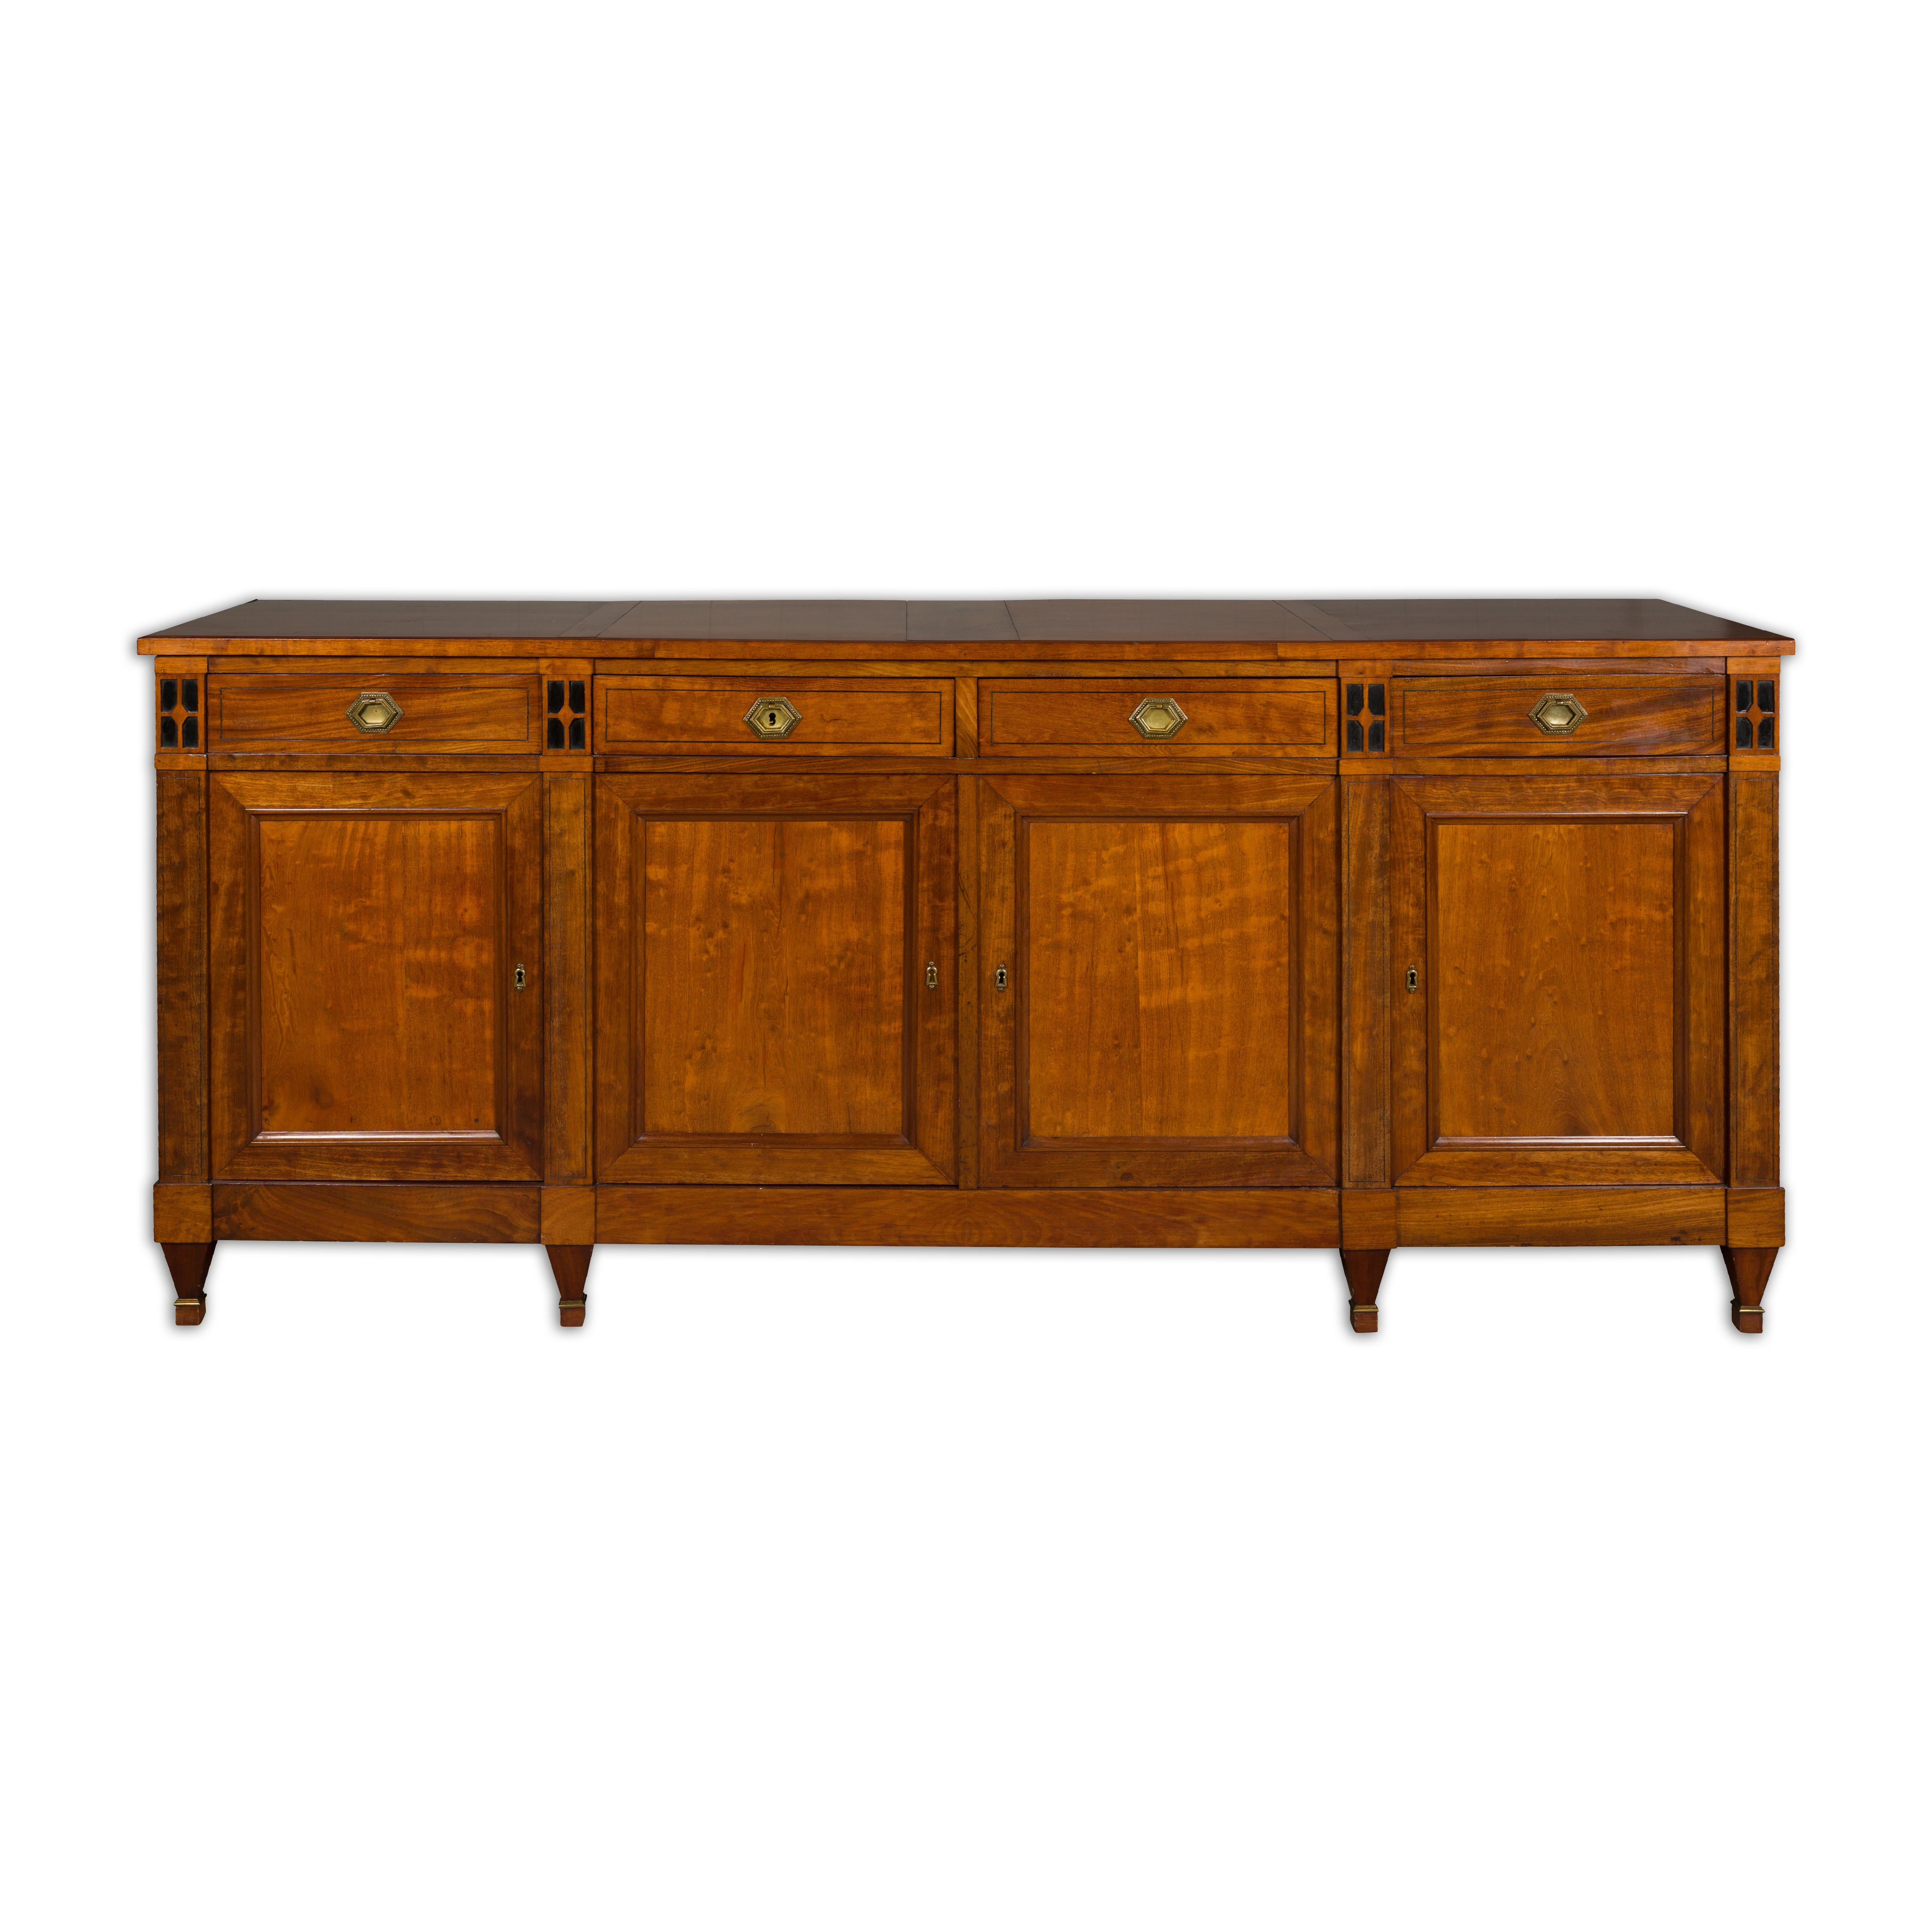 A French Turn of the Century walnut enfilade circa 1900 with four drawers over four doors, ebonized accents, thin banding, brass hardware and tapered feet. Immerse yourself in a symphony of impeccable craftsmanship and elegant design with this